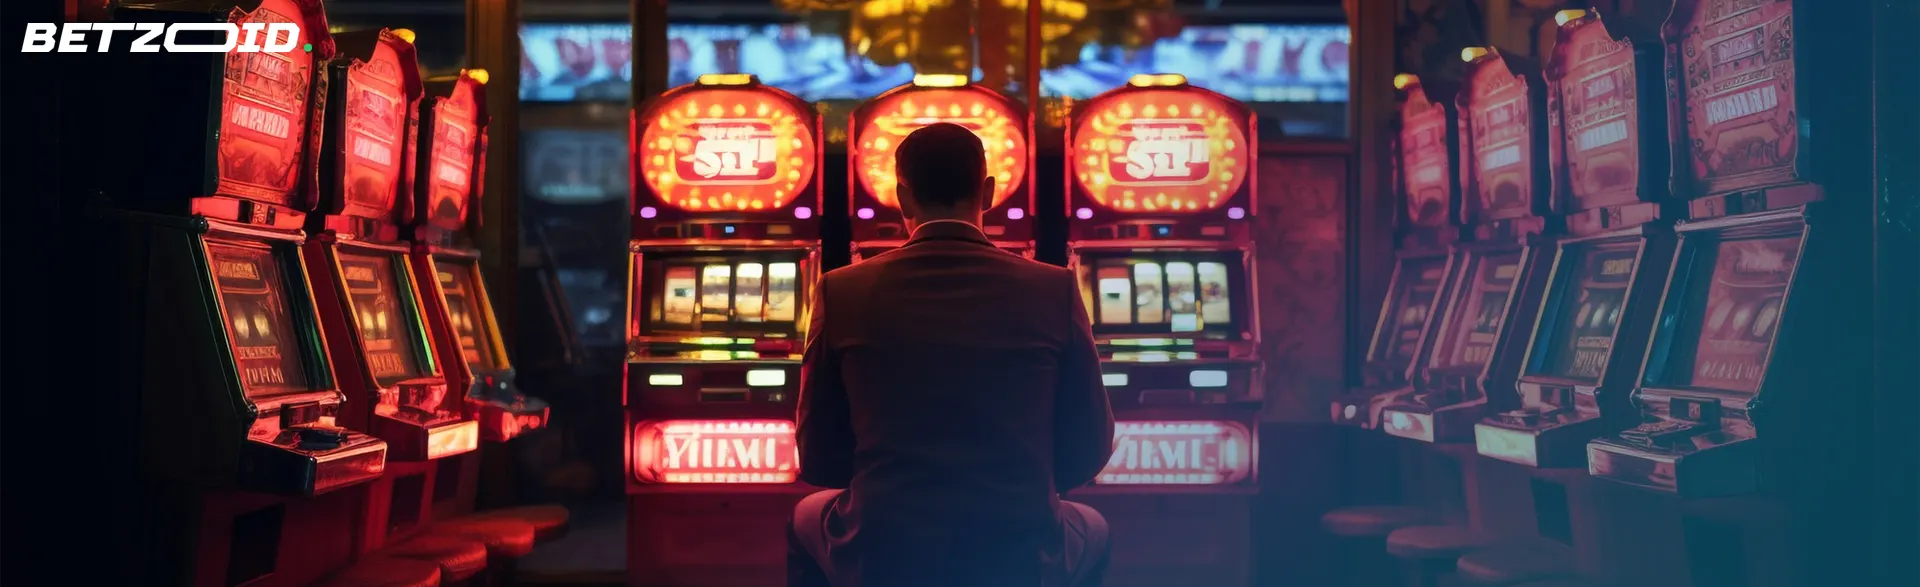 A person in front of slot machines, reminiscent of the allure of Android casino apps.